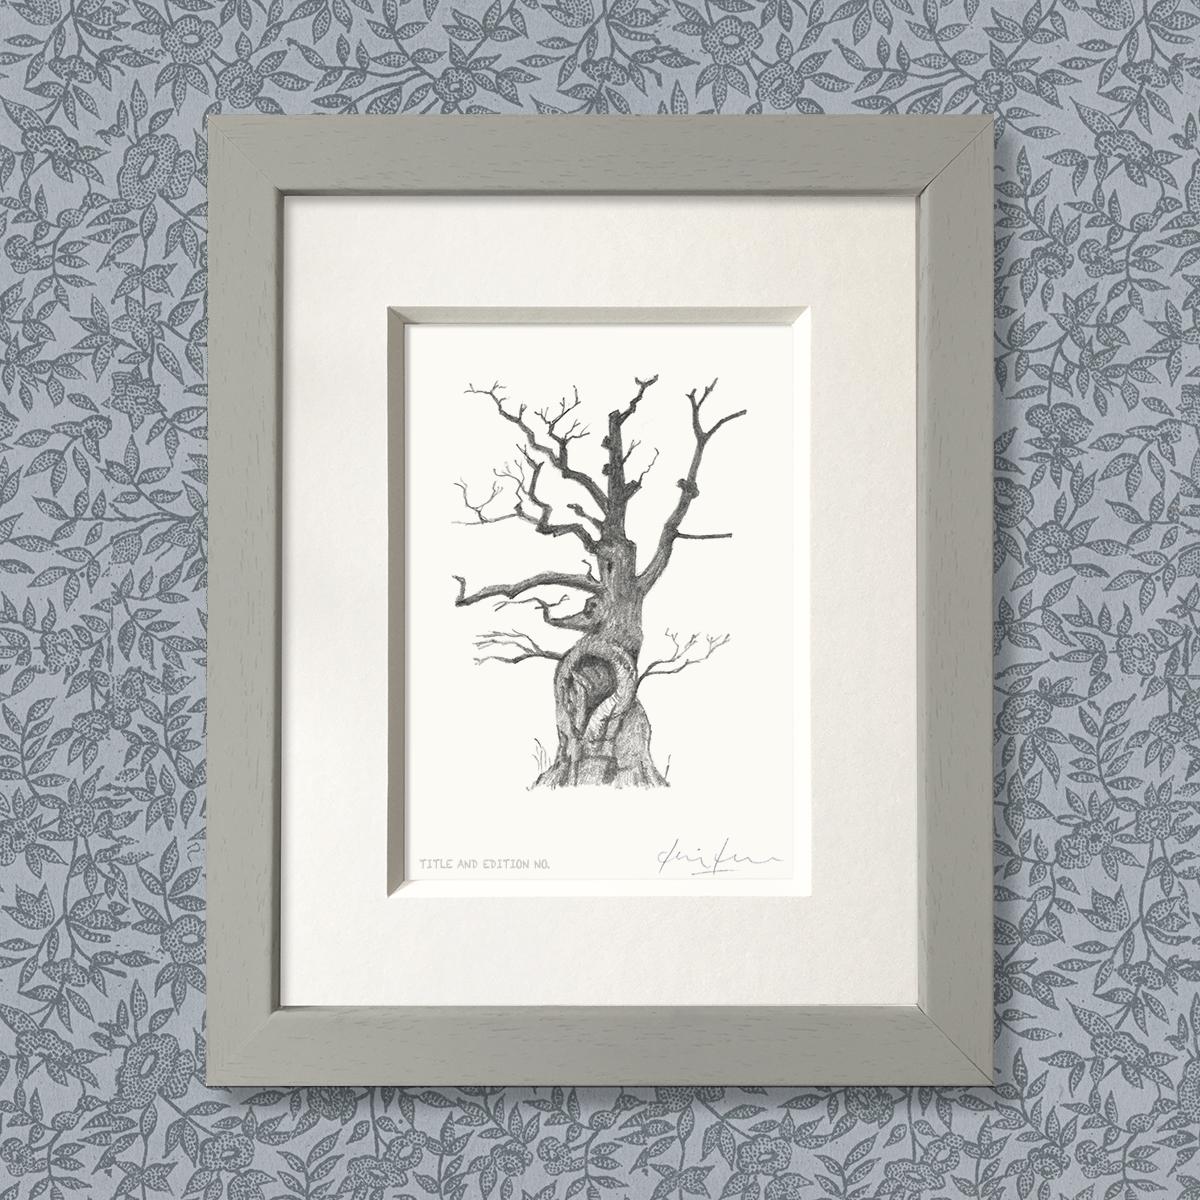 Limited edition print from pencil sketch of a tree in a grey frame